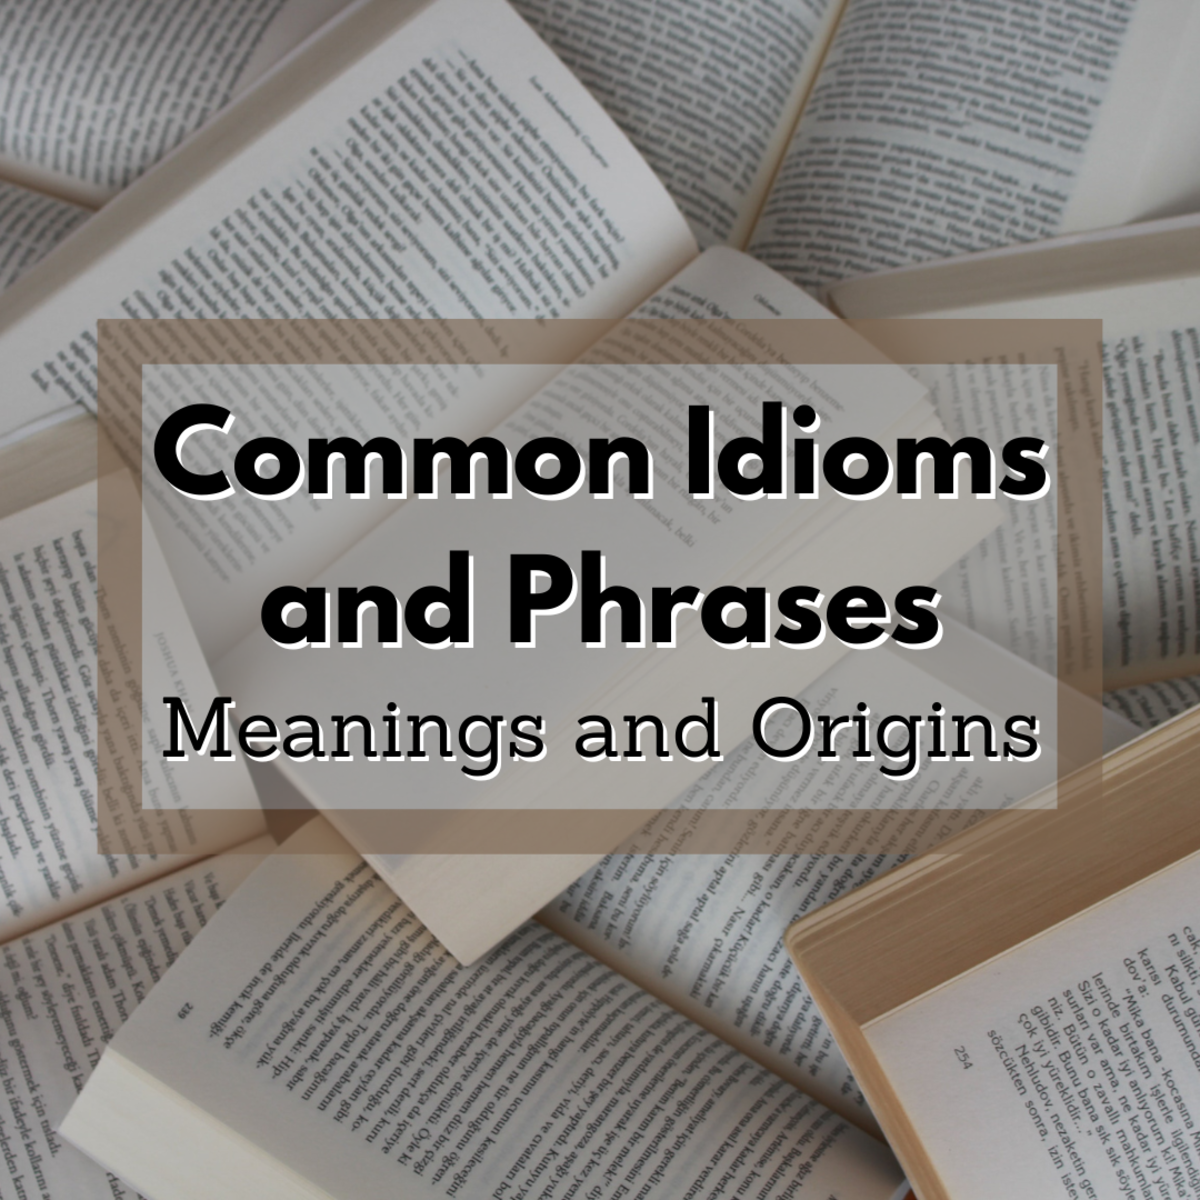 Read on to learn what an idiom is. You'll also learn a number of common idioms in the English language.